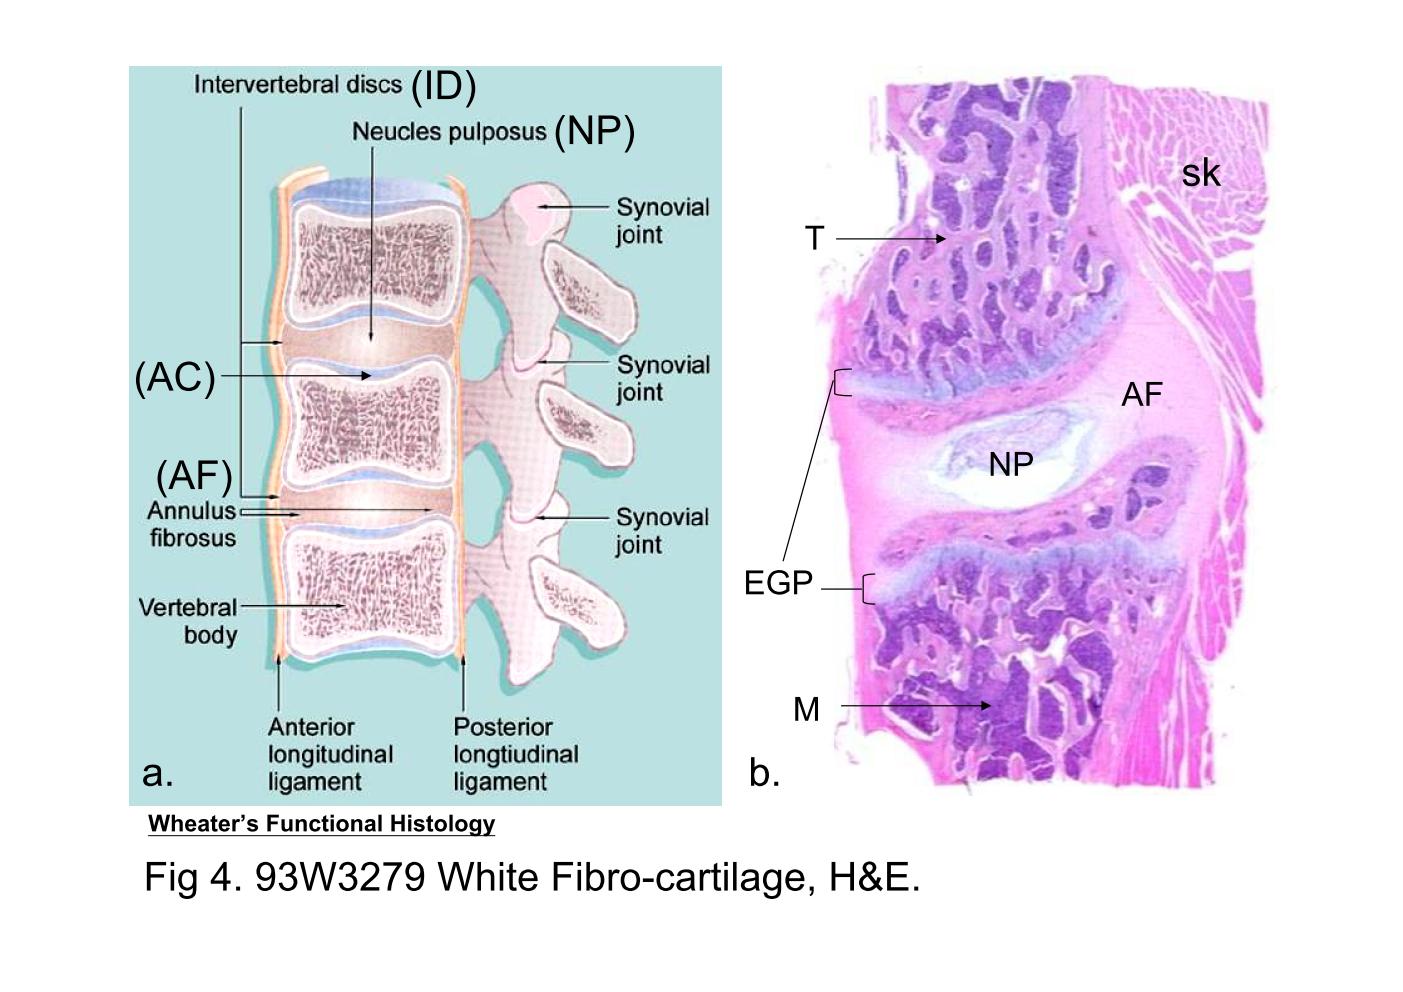 block6-1_11.jpg - Fig 4a. The intervertebral jointsThe intervertebral disc (ID) lies between the adjacent vertebralbodies. The articular surface of vertebral body is covered byhyaline articular cartilage (AC). The fibrocartilage of eachintervertebral disc is arranged in concentric rings forming theannulus fibrosus (AF). Within the disc, there is a central cavitycontaining a viscous fluid, the nucleus pulposus (NP).Fig 4b. 93W3279 White Fibro-cartilage (sec.) H&E.This section is prepared from the developing vertebral column.Except the structures mentioned above, the skeletal muscle (sk)and the epiphyseal growth plates (EGP) can be identified. In thislow power photomicrograph, the vertebral bodies have beenpartially replaced by bone trabeculae (T), and the bone cavity isfilled with bone marrow (M).